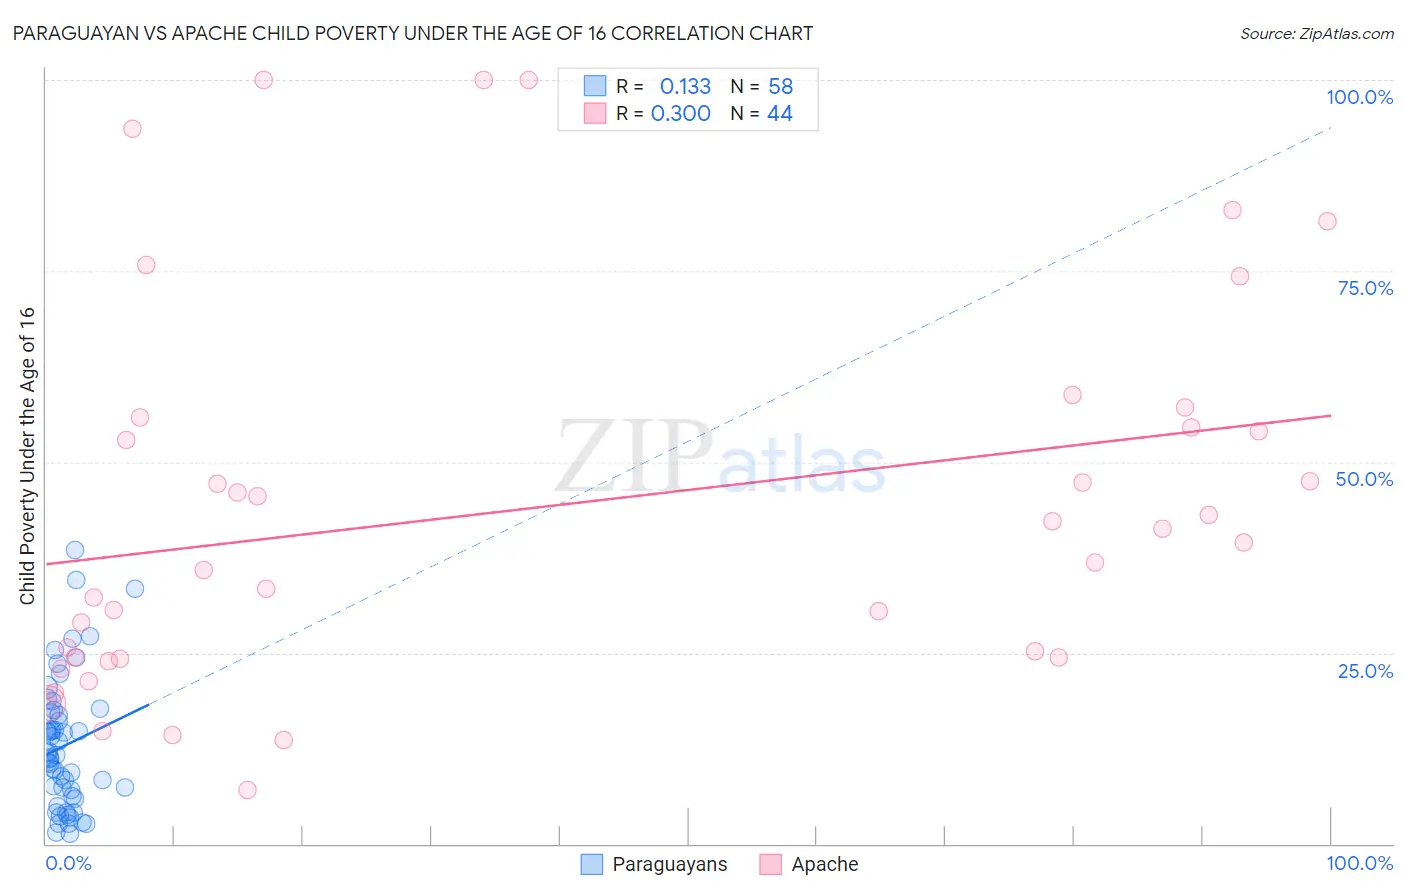 Paraguayan vs Apache Child Poverty Under the Age of 16